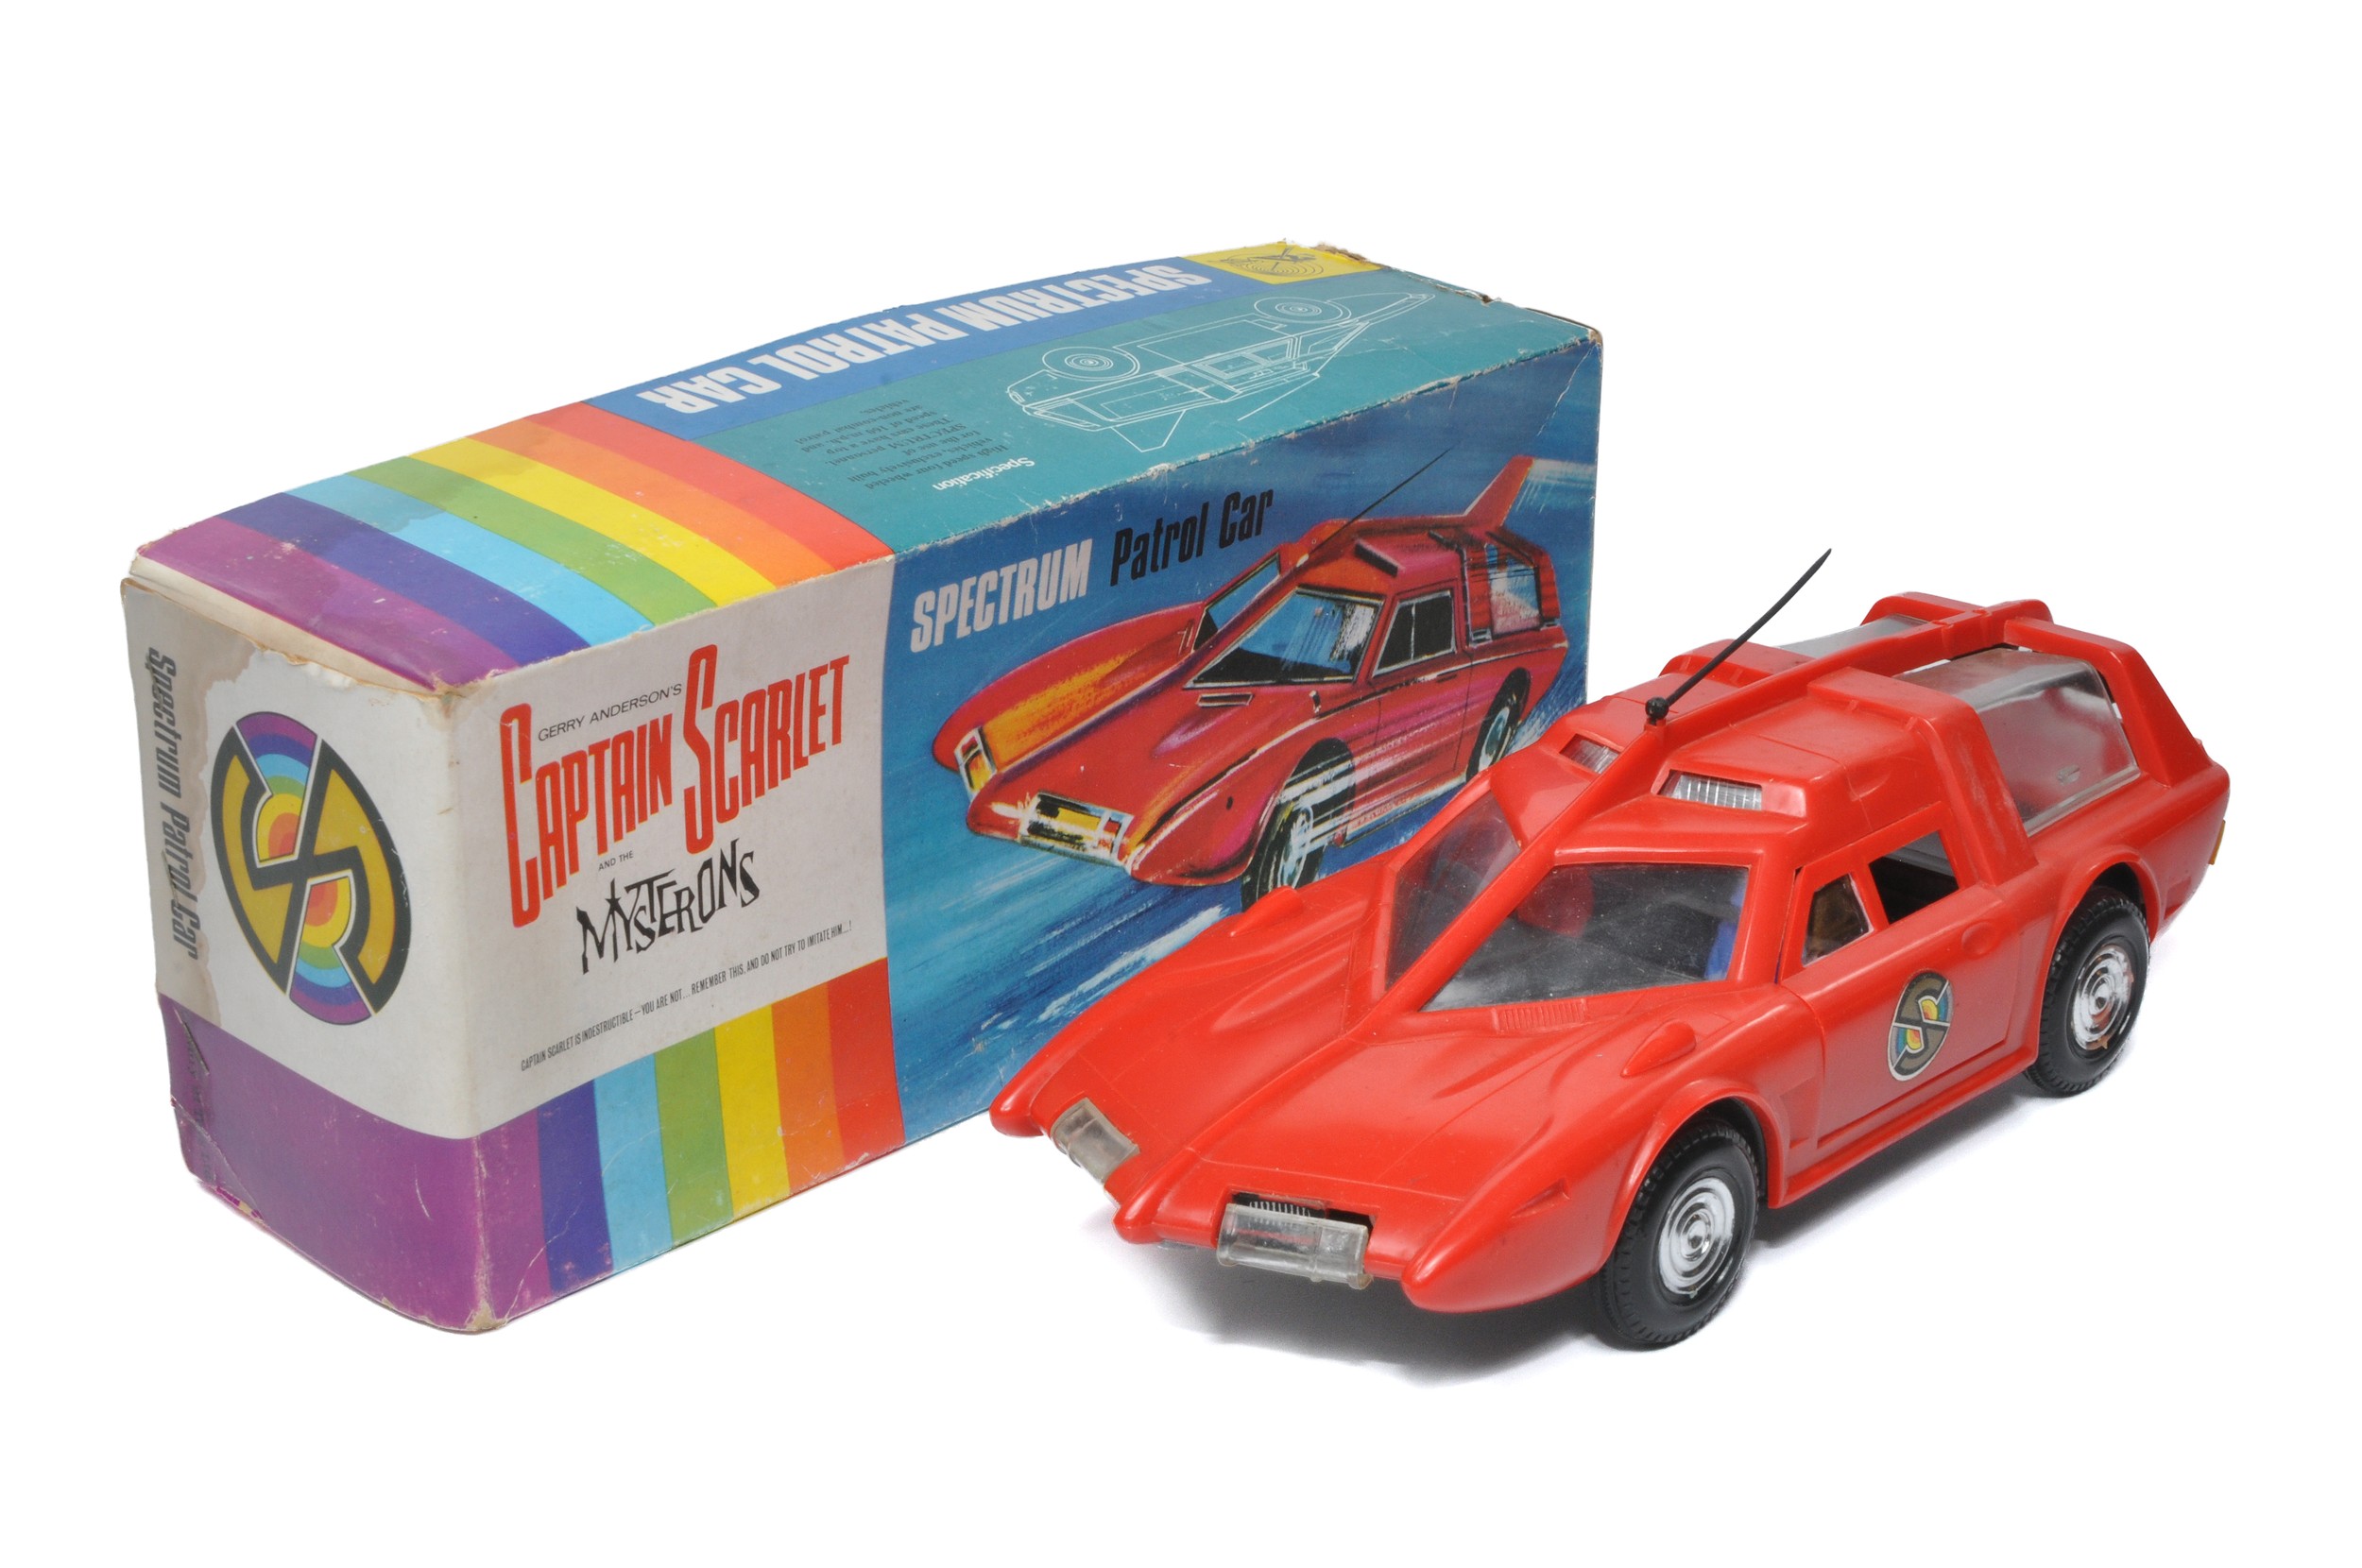 JR21 for Gerry Anderson - Captain Scarlet and the Mysterons Spectrum Patrol Car. Red. Friction